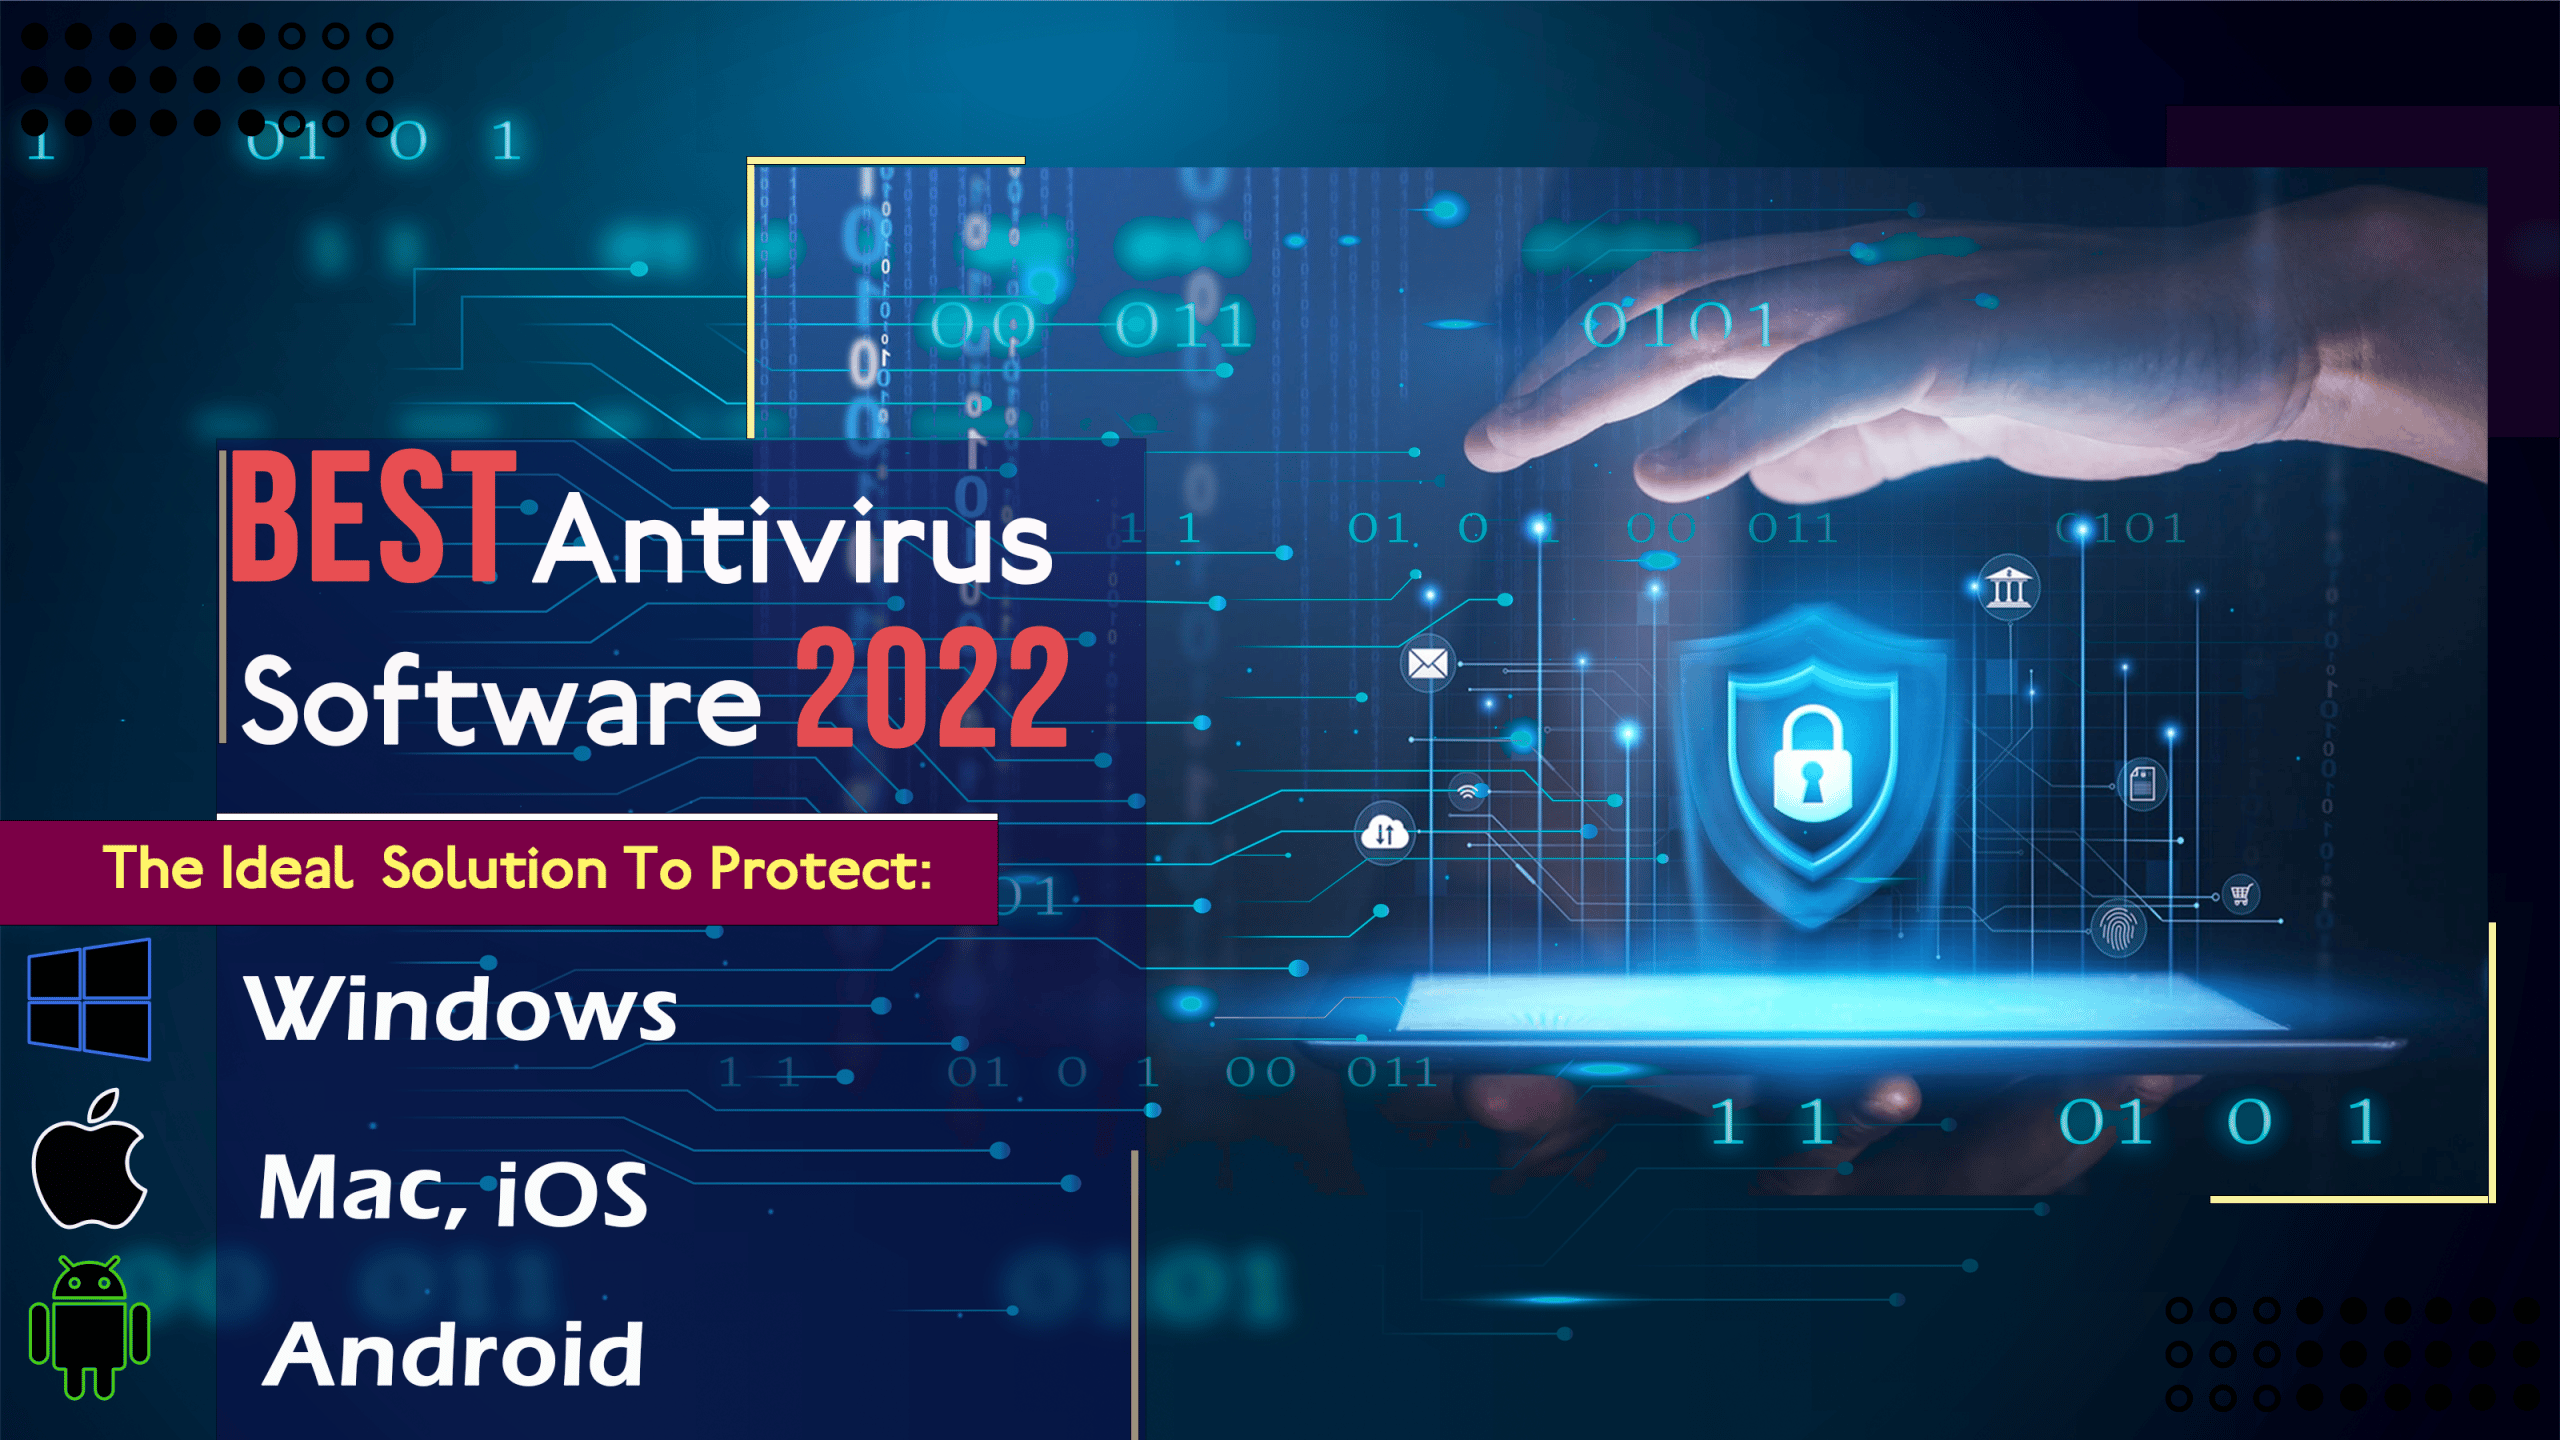 The Best Antivirus Software for Windows, MacOS, Android